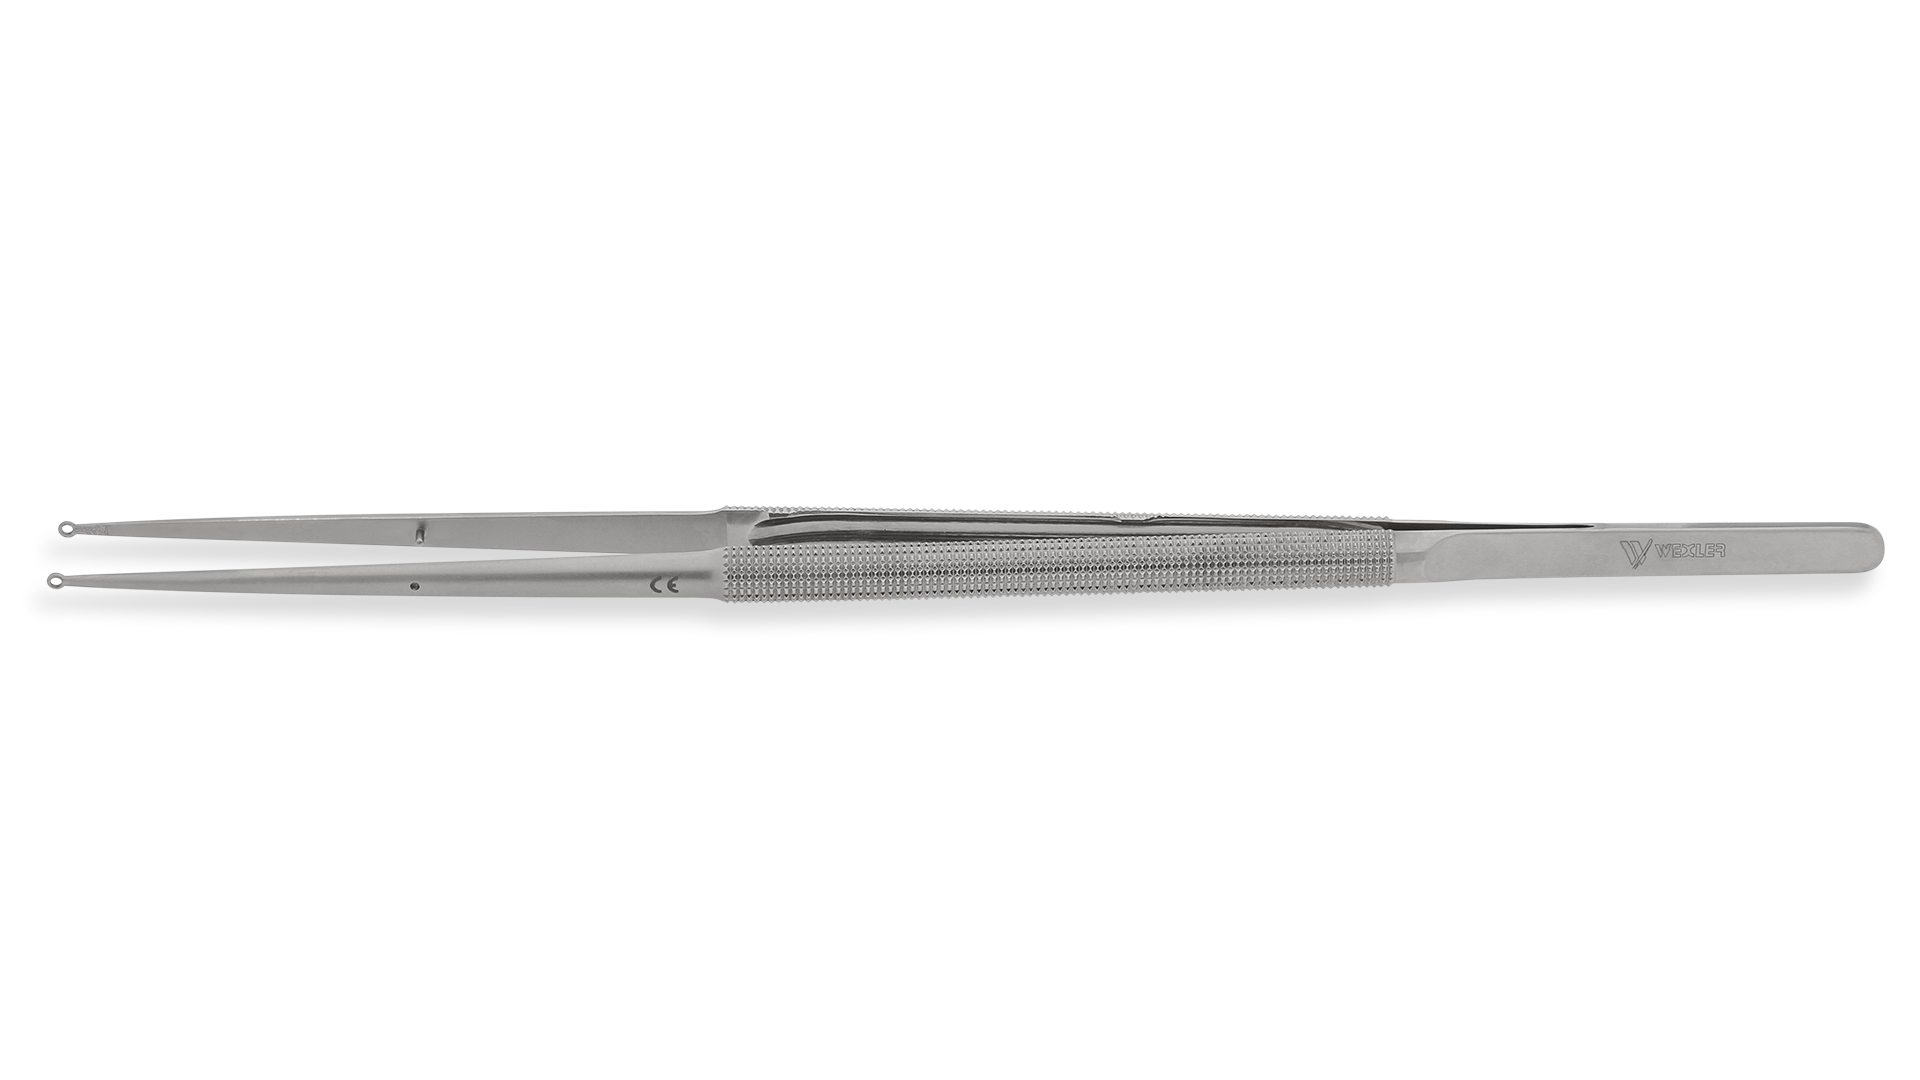 Ring tip Forceps - Straight 2.5 mm TC coated rings